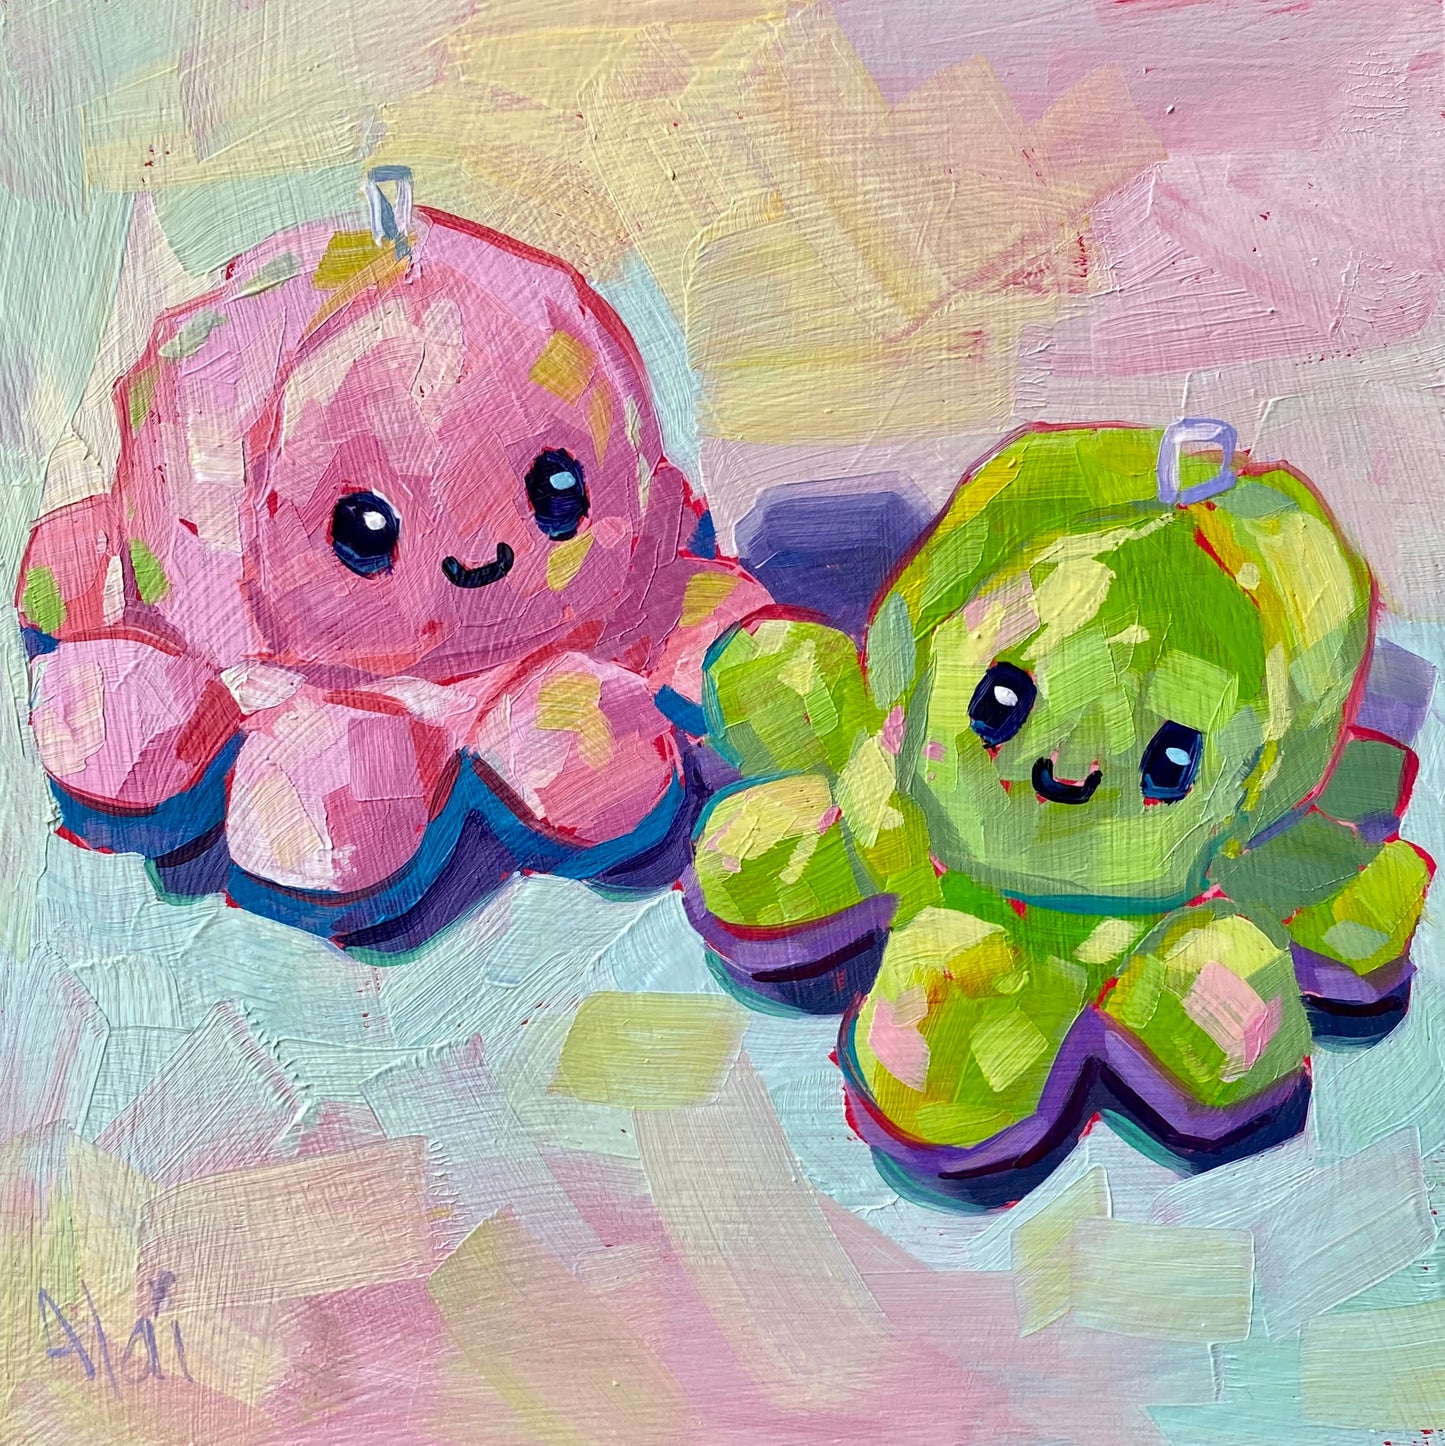 Complementary friends - Original Oil Painting